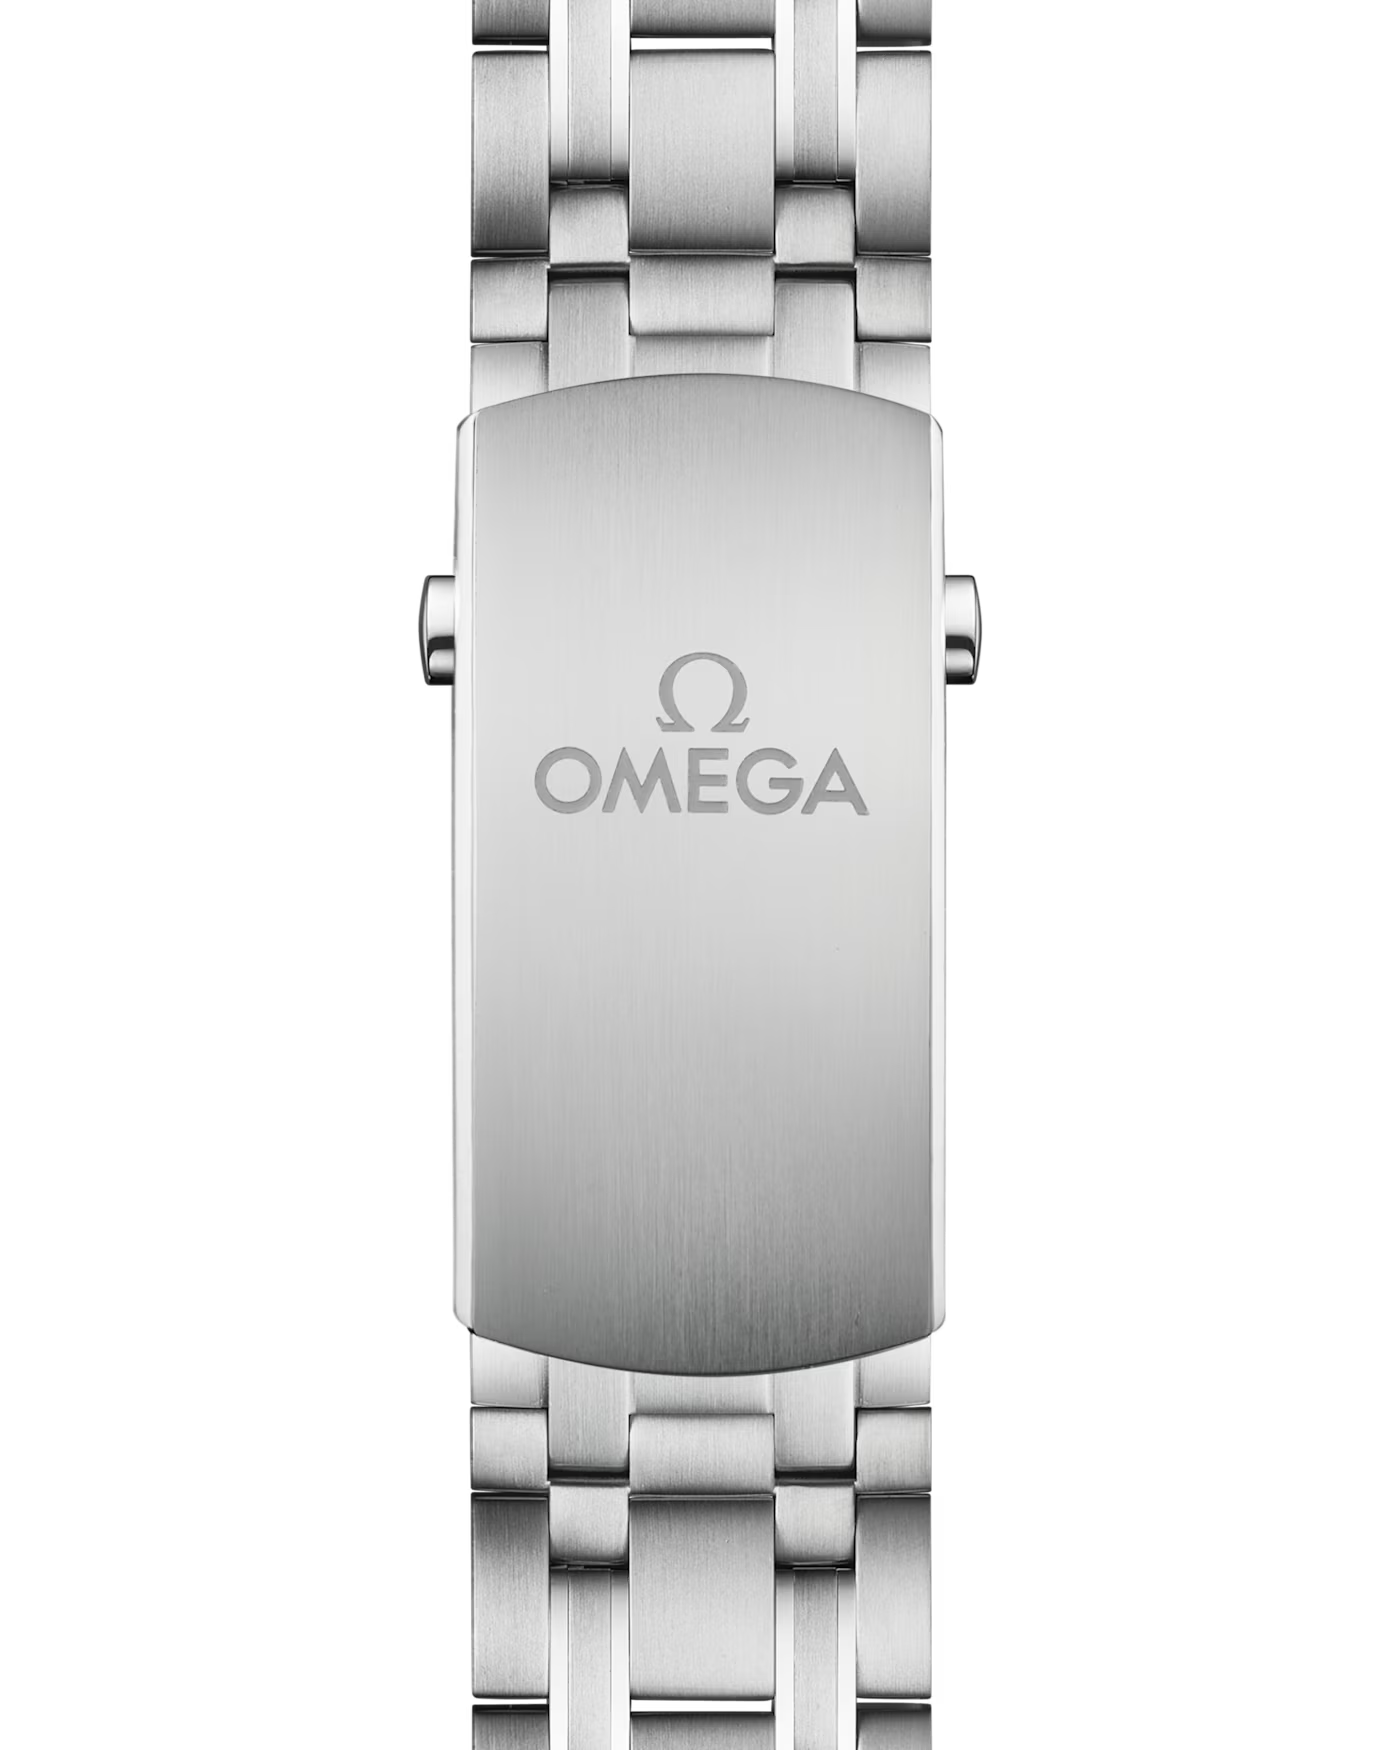 OMEGA-SEAMASTER DIVER 300M CO-AXIAL MASTER CHRONOMETER 42 MM 210.30.42.20.04.001